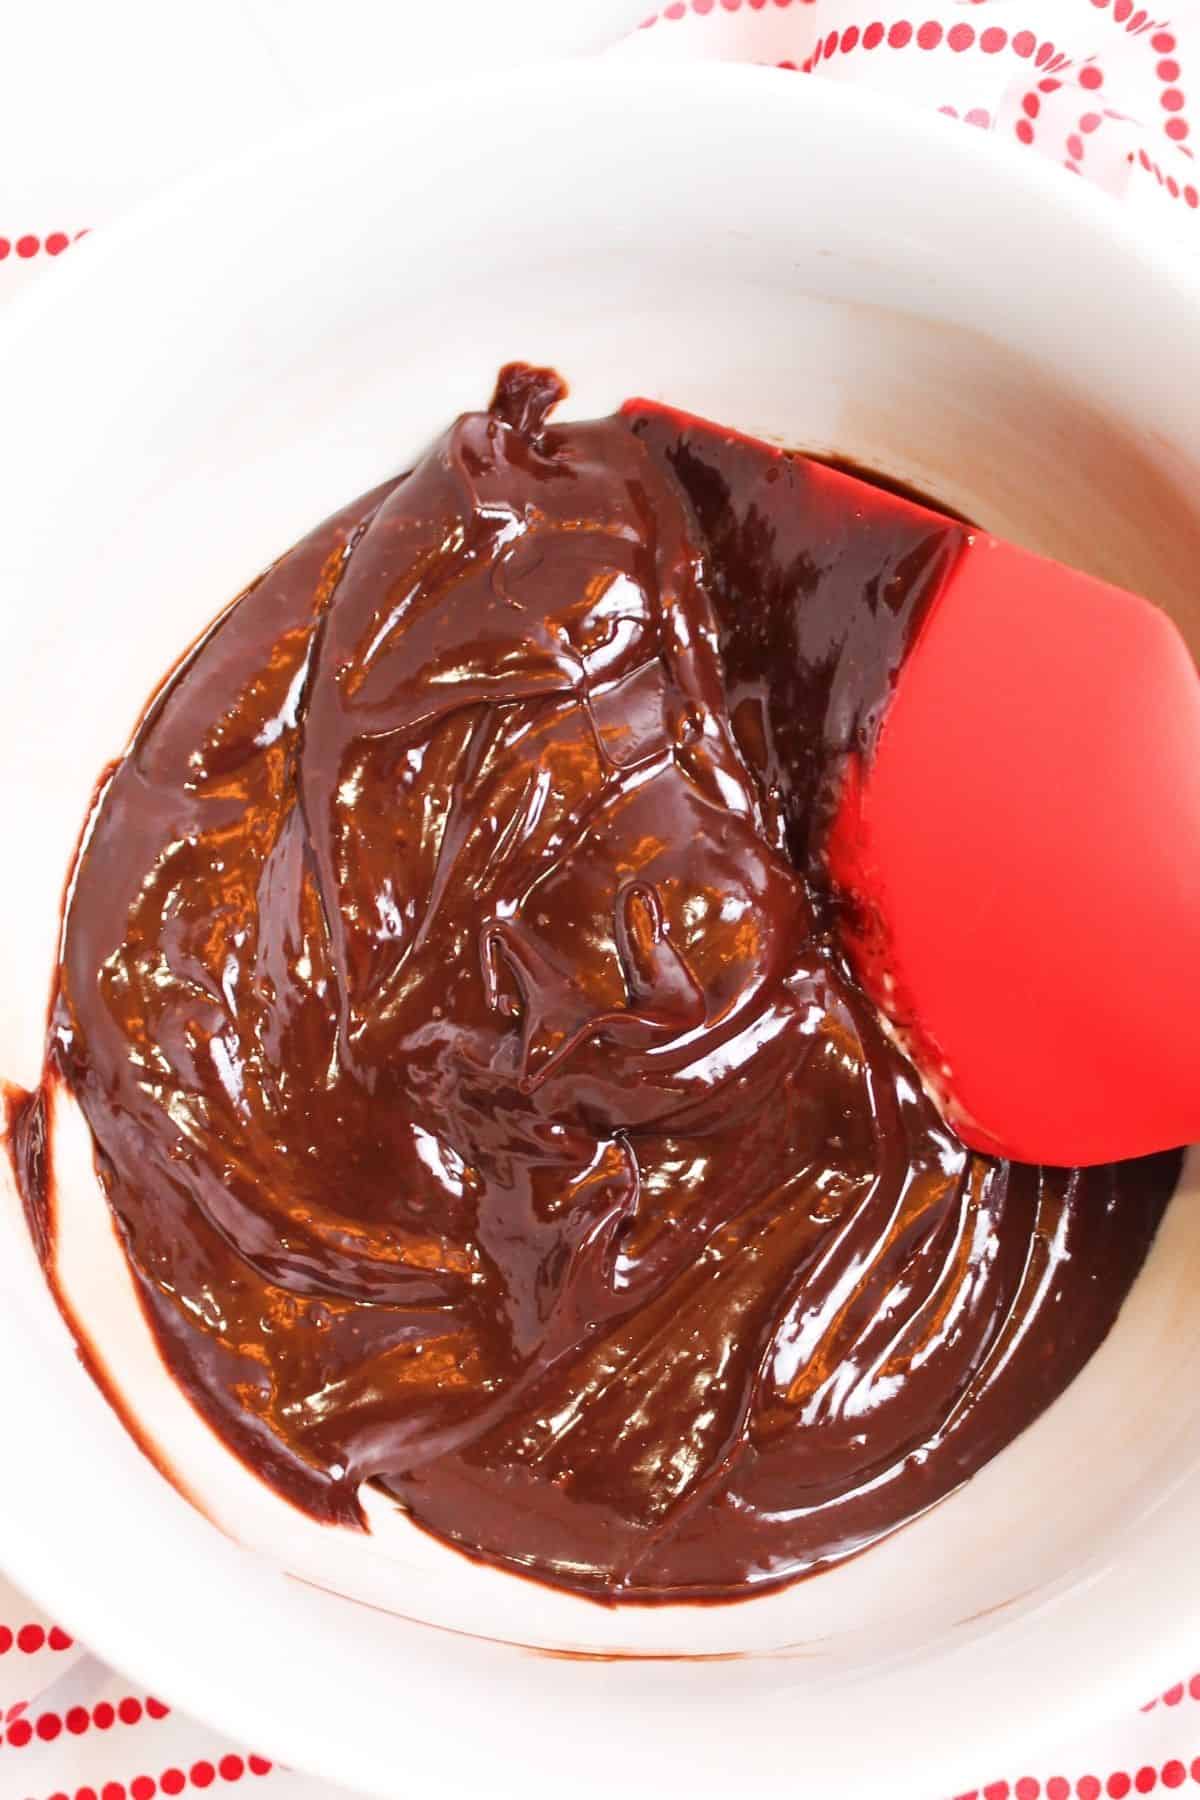 mixing and melting chocolate